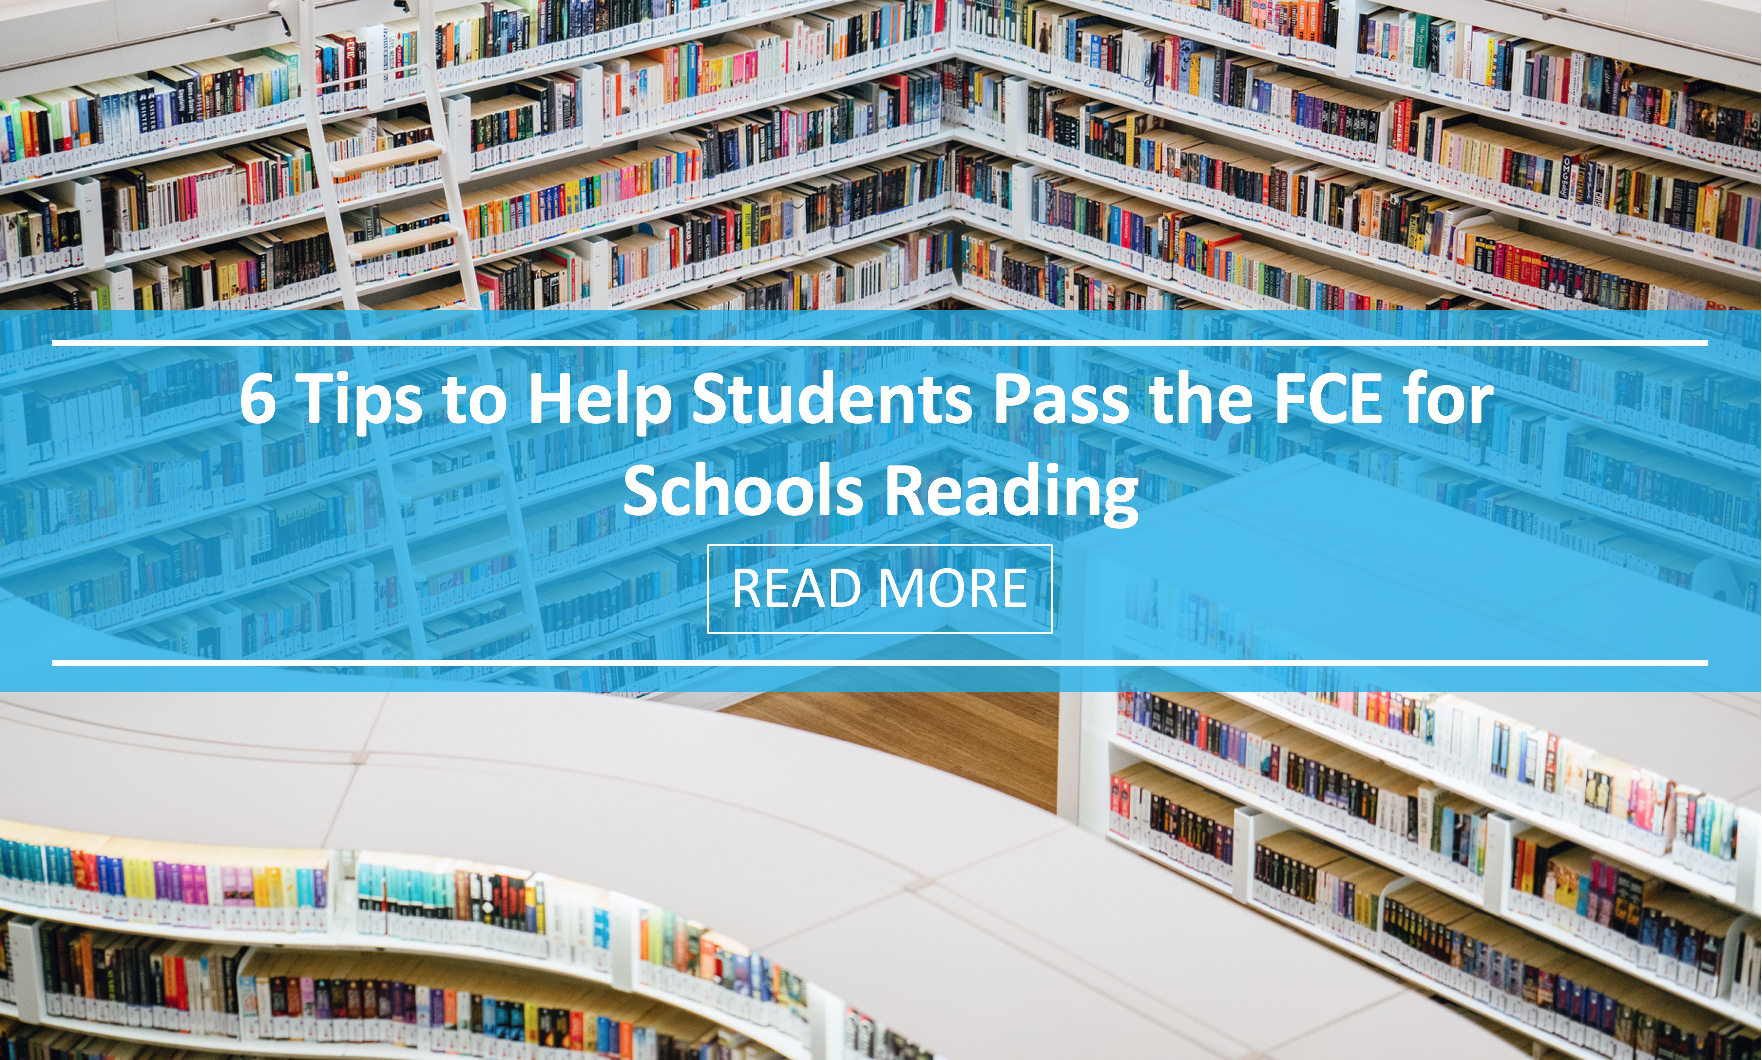 6 Tips to Help Students Pass the FCE for Schools Reading